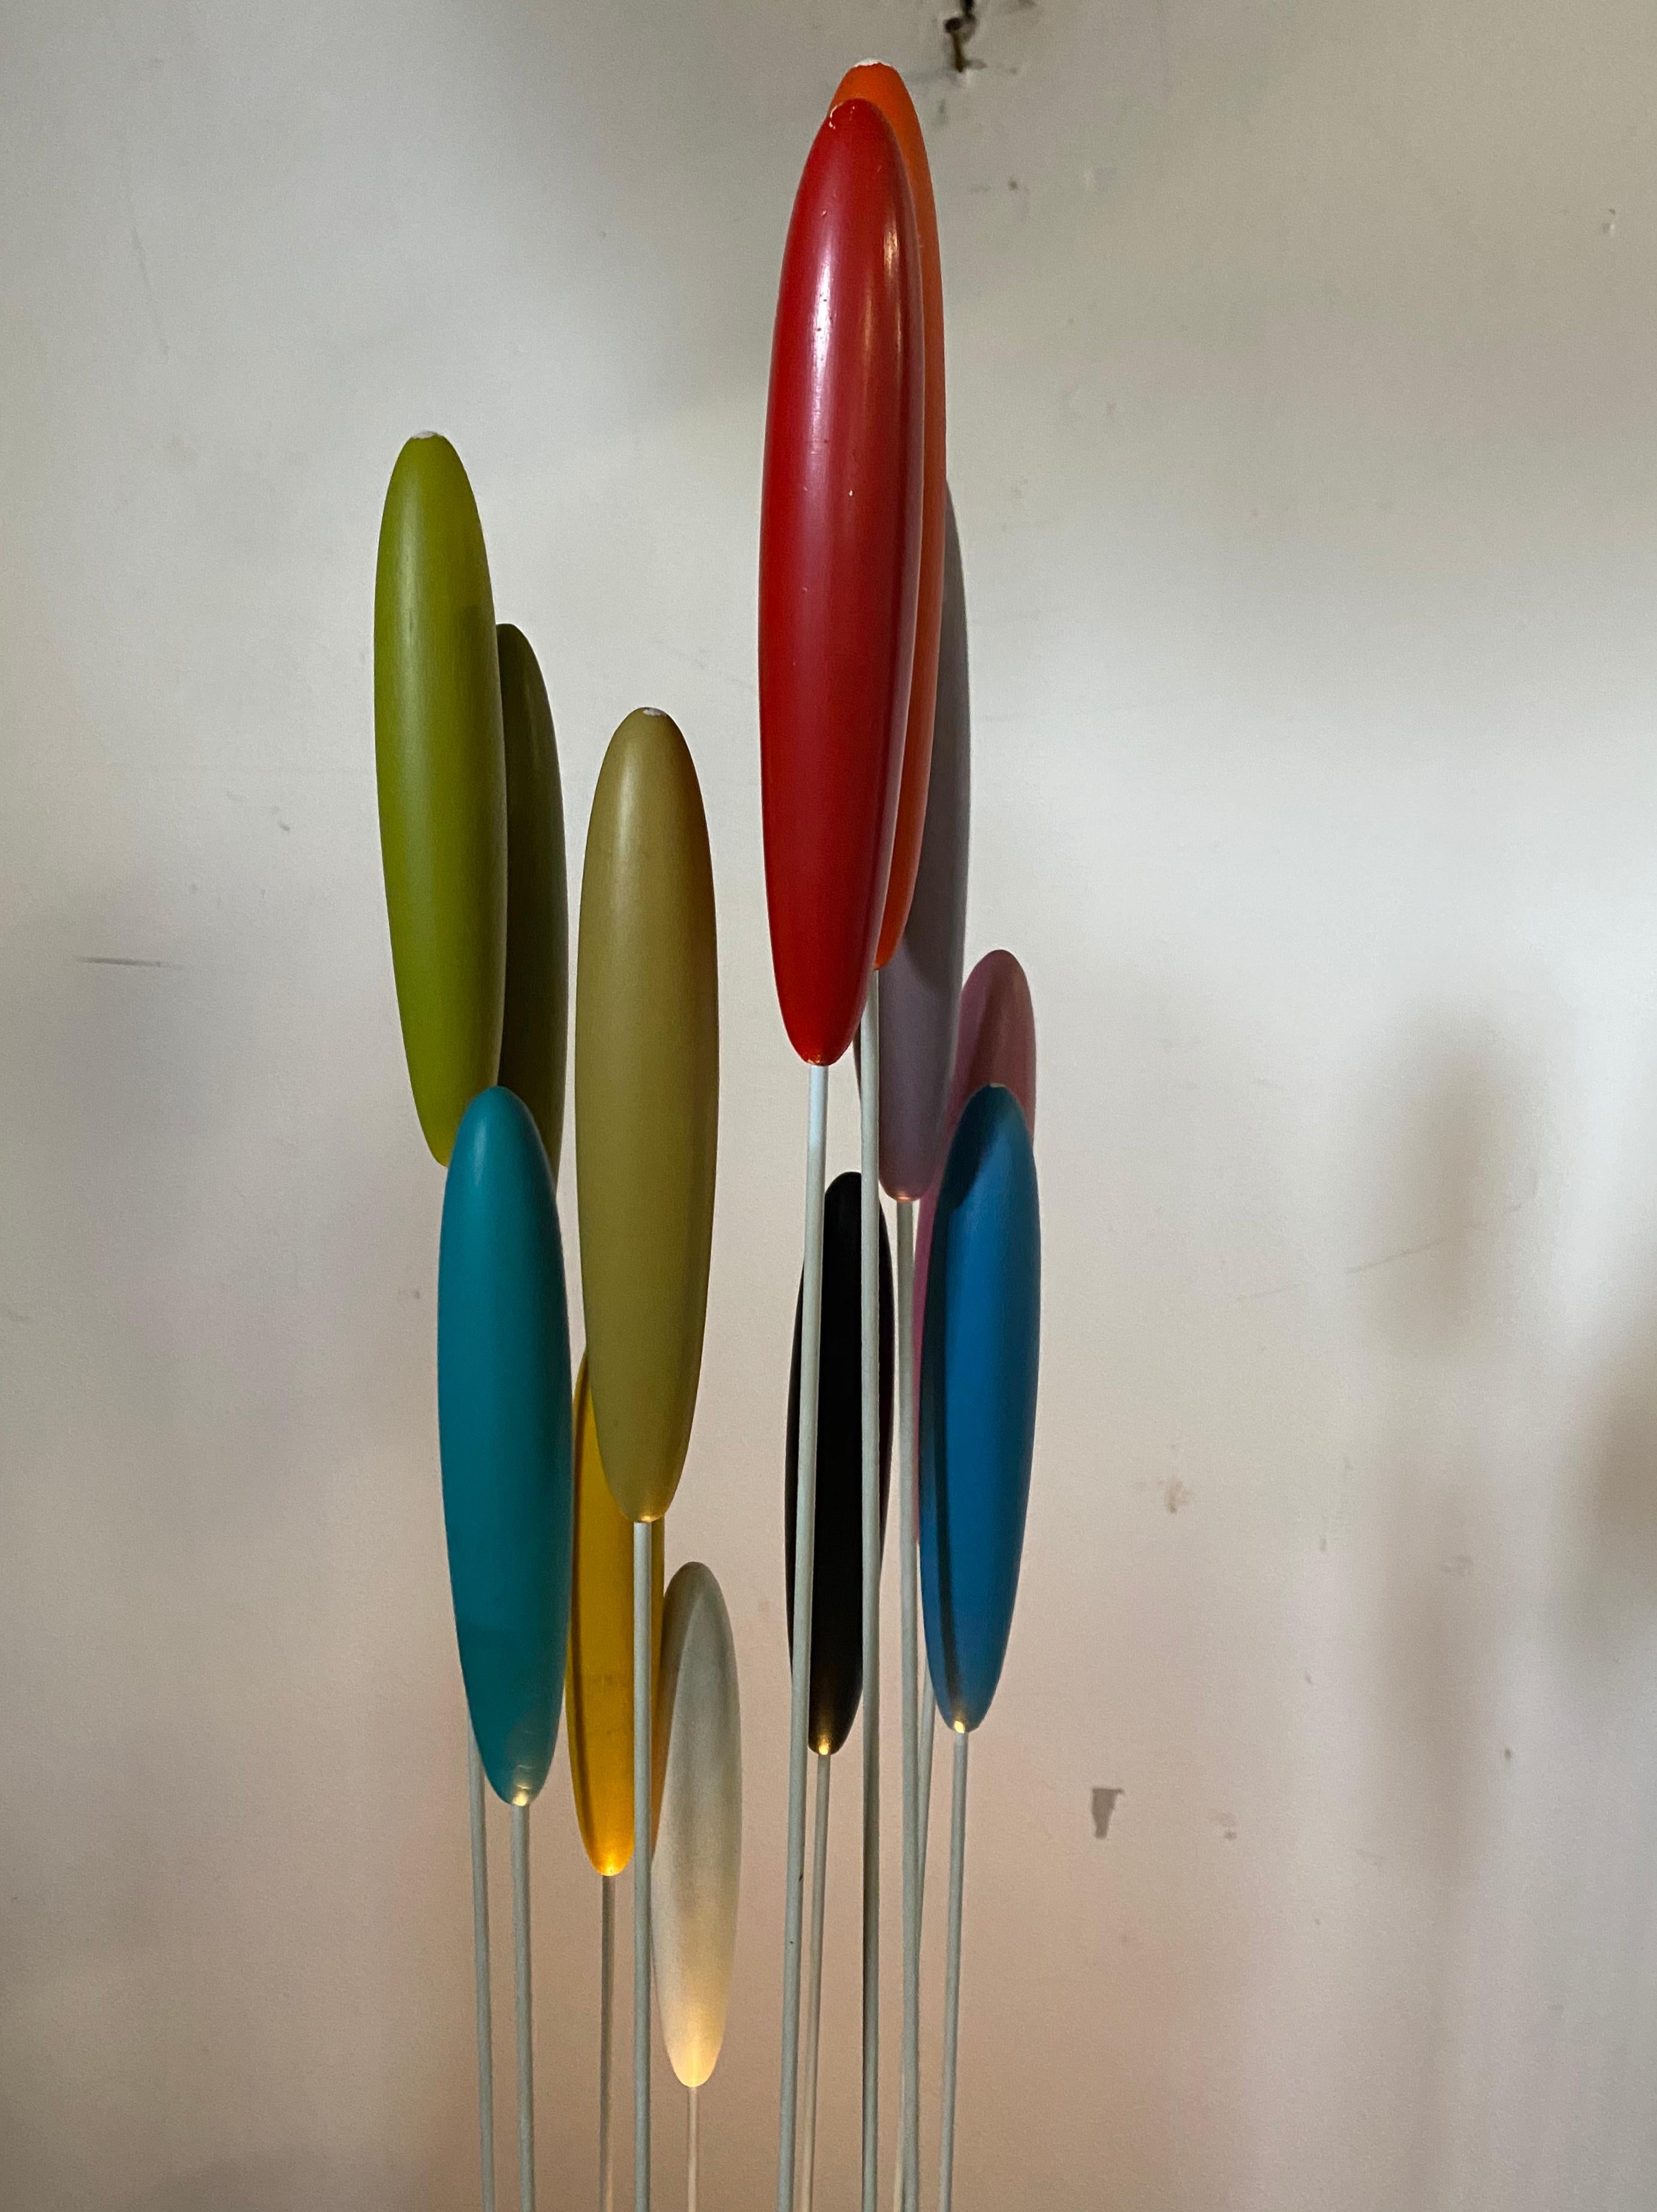 American Bill Curry 'Cattails' Lamp.. Iconic Modernist Design, , amazing colors